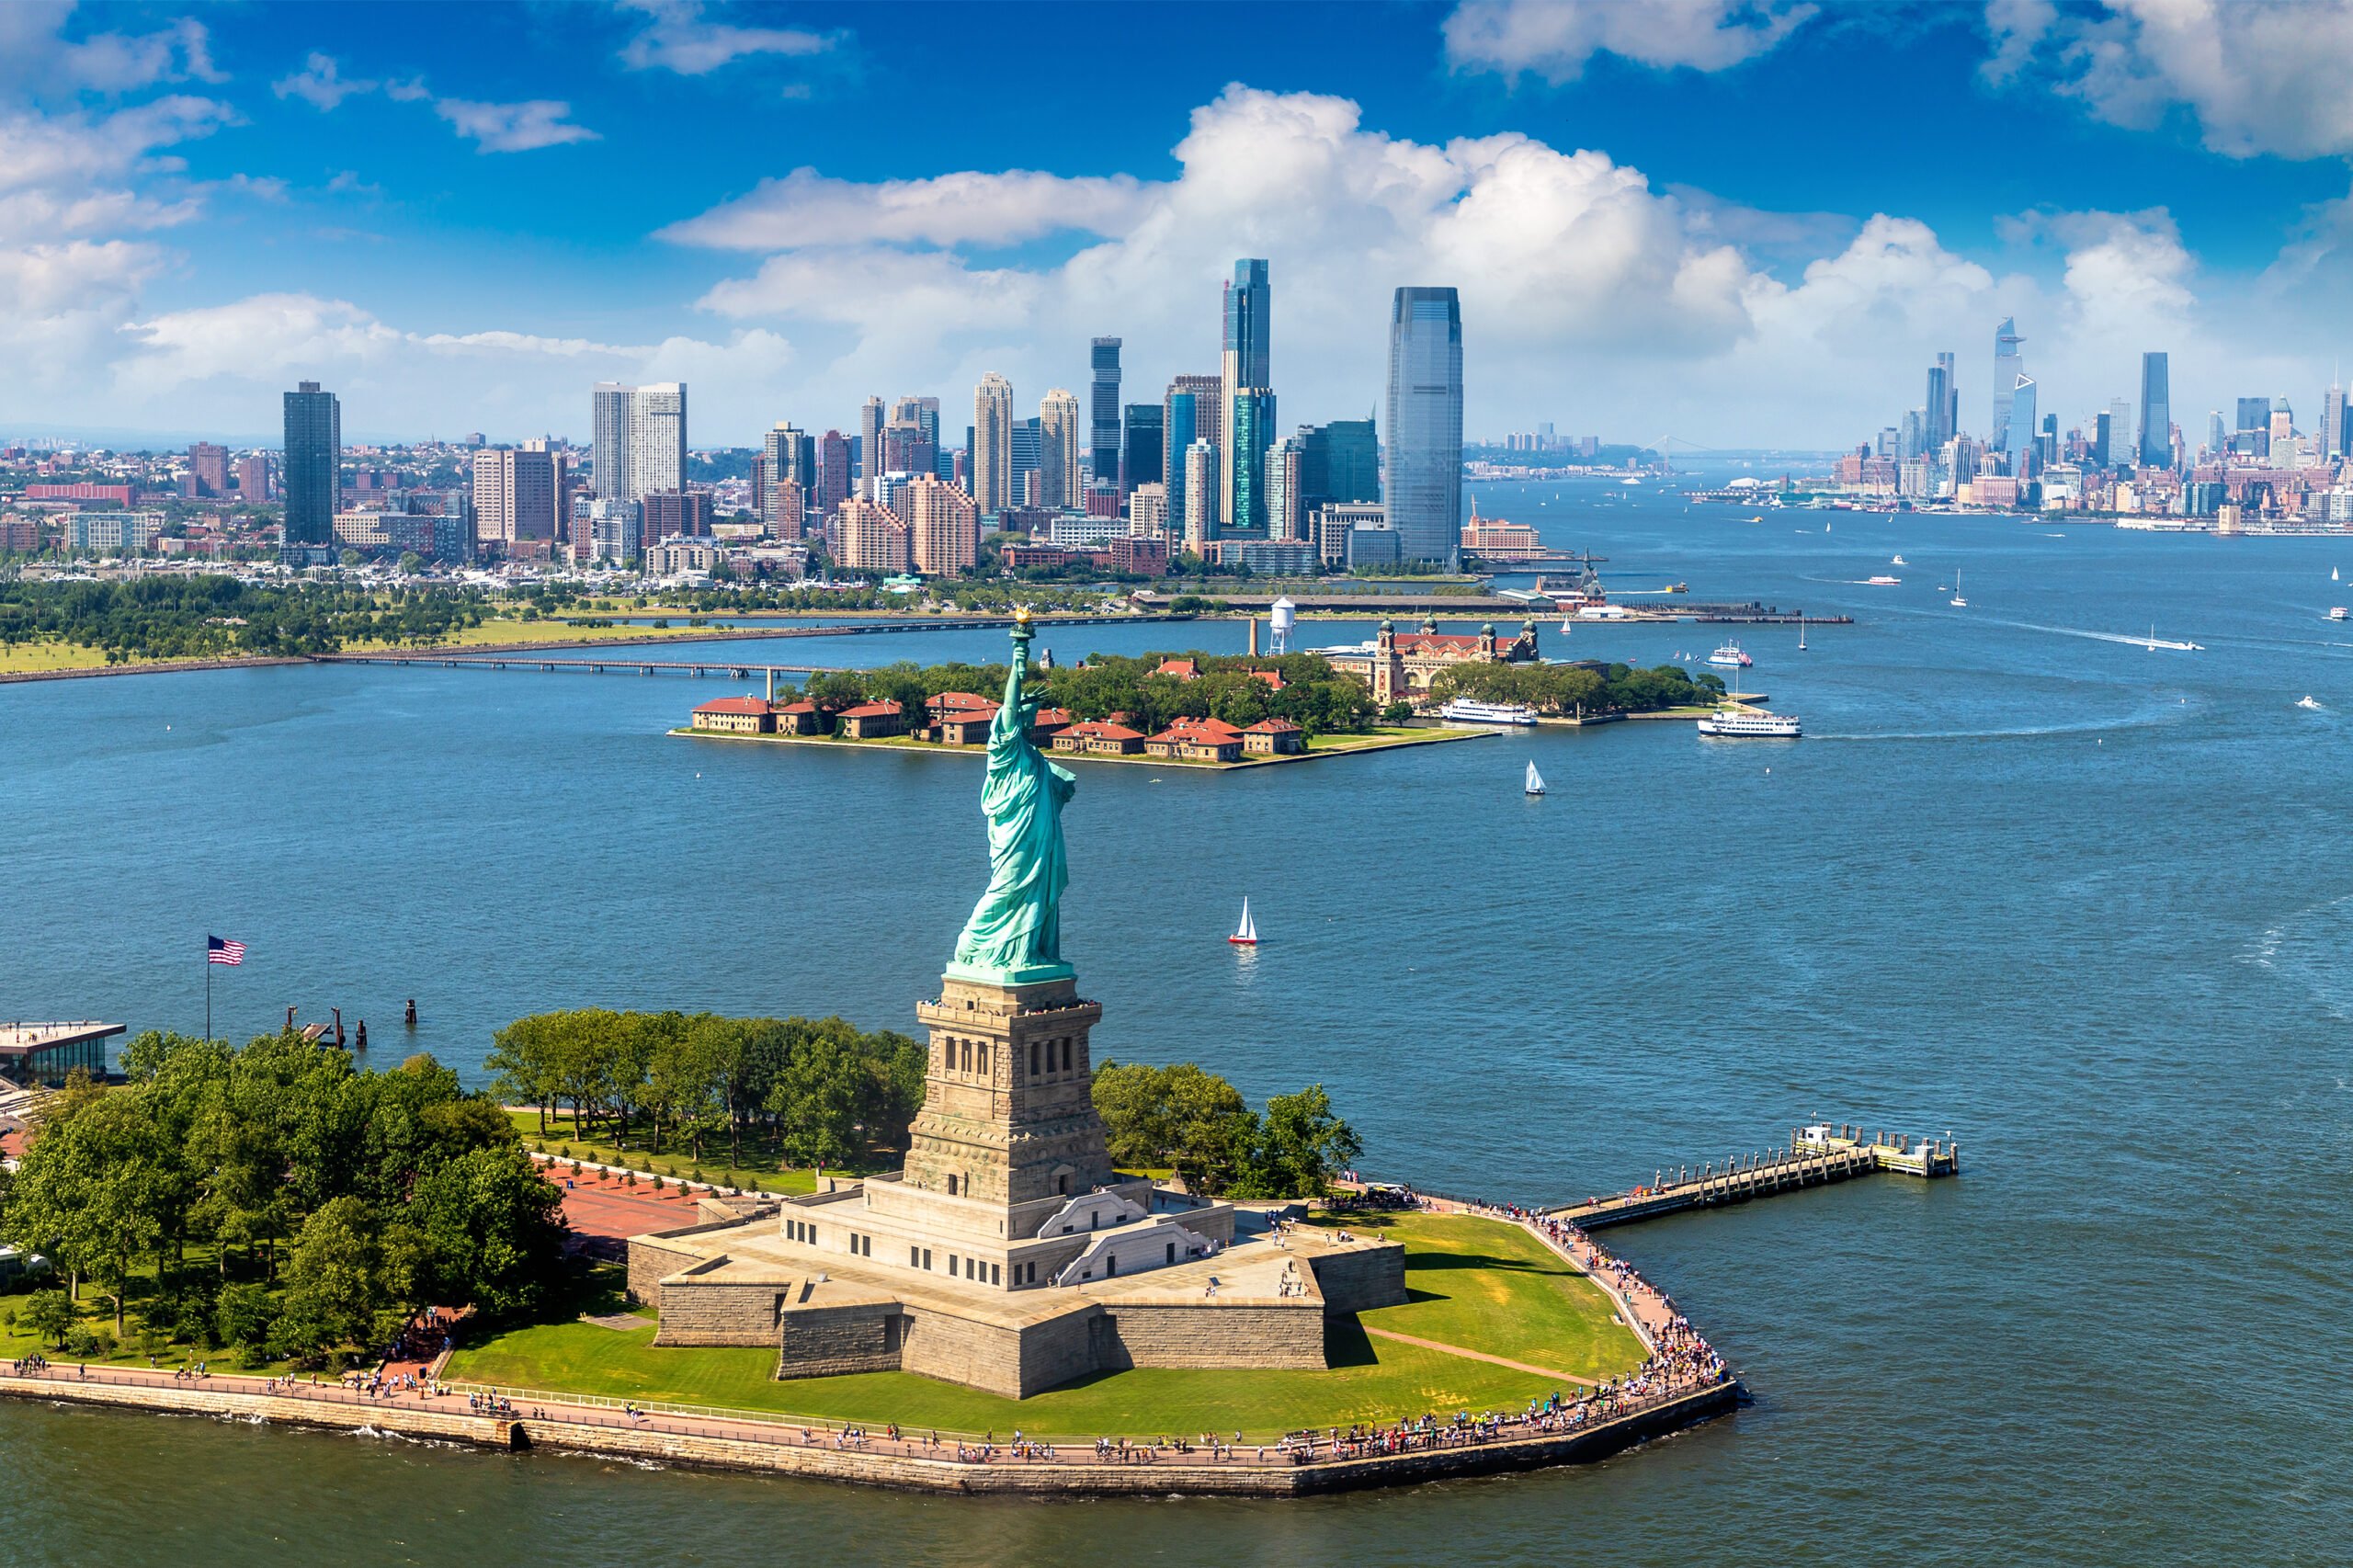 New York Skyline and Statue of Liberty